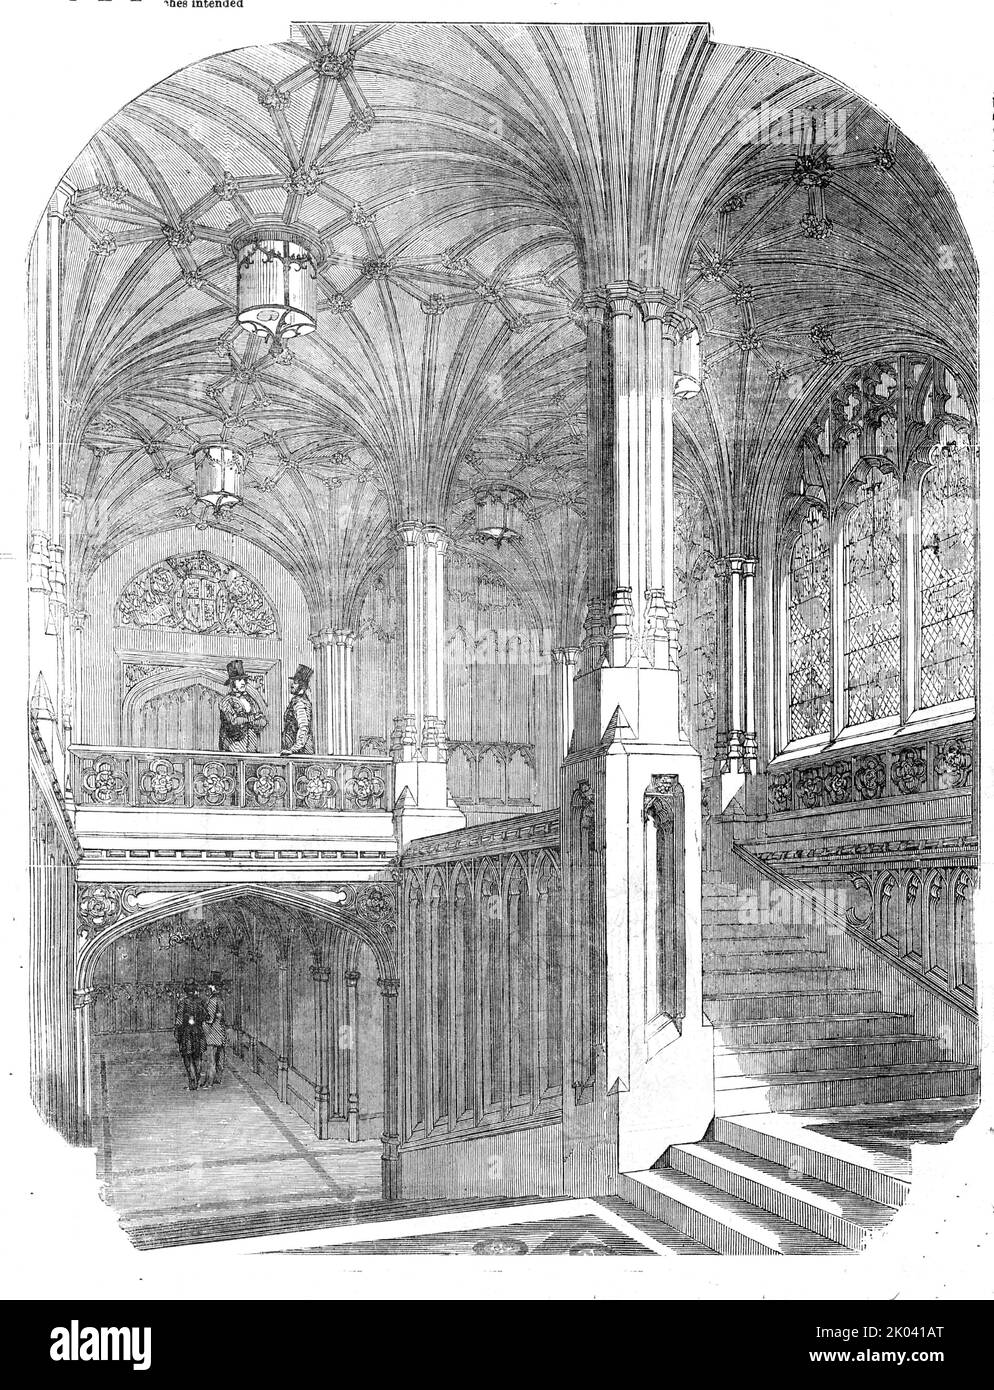 The New Houses of Parliament - Members' Staircase, House of Commons, 1854. Interior of the Palace of Westminster, London, designed in Victorian Gothic style by Augustus Pugin. 'Clustered columns in the centre, and on each side, support a stone roof, most elaborately groined; the intersections of the groining having bosses of infinite variety of character and detail. The windows...are filled with gorgeous stained glass; and, at night, the Staircase is lighted by lanterns pendent from the centres of the intersecting arches of the roof...Panelling and quatre-foils fill the walls on the sides of t Stock Photo